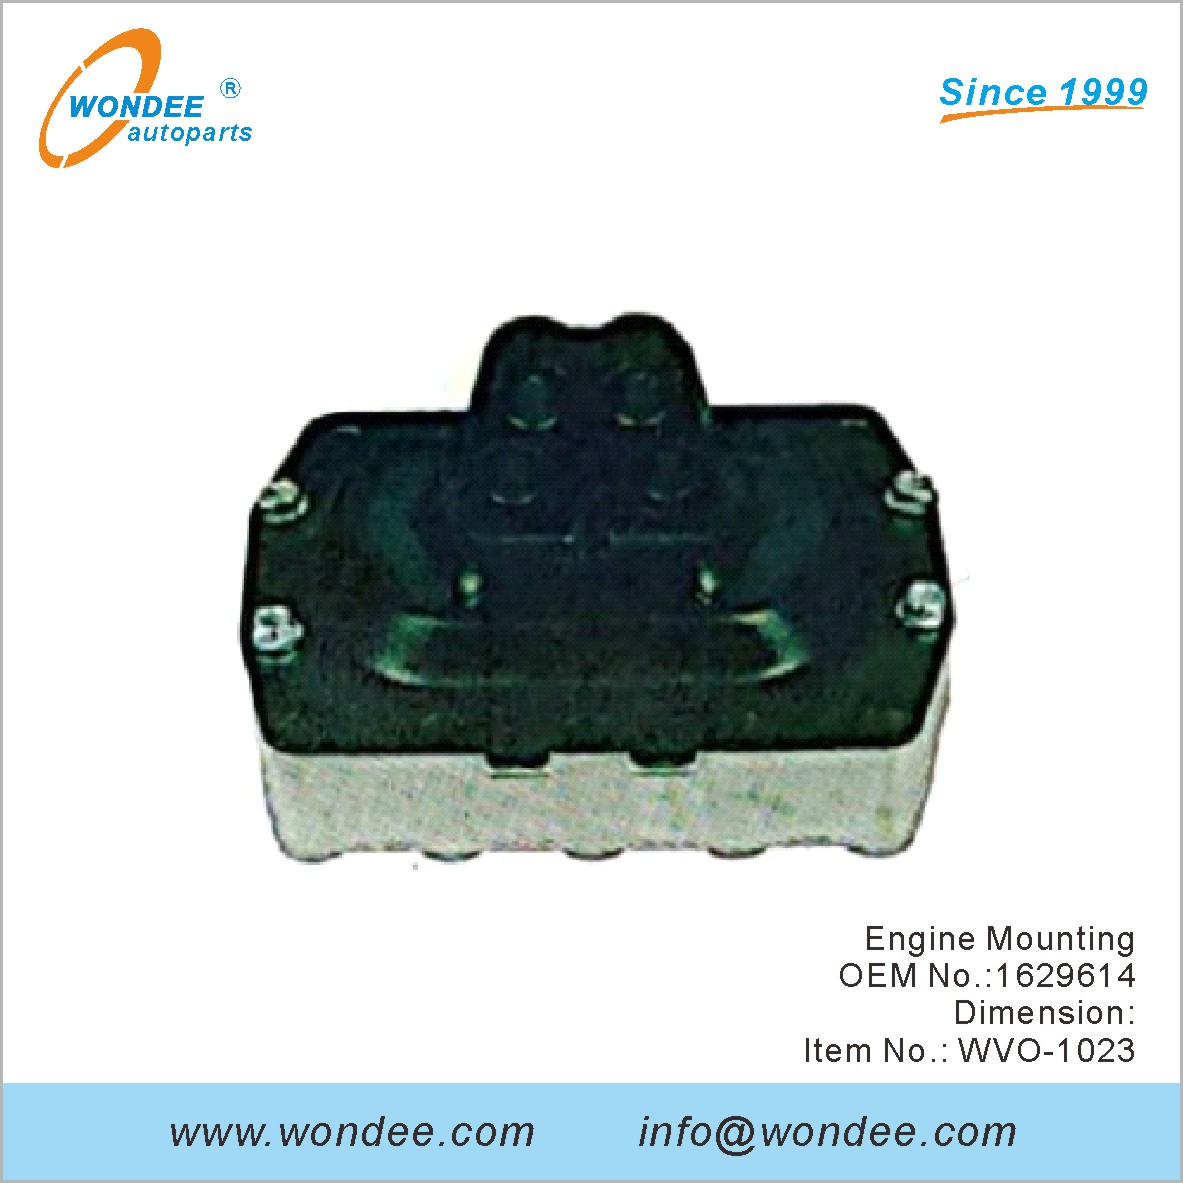 Engine Mounting OEM 1629614 for Volvo from WONDEE